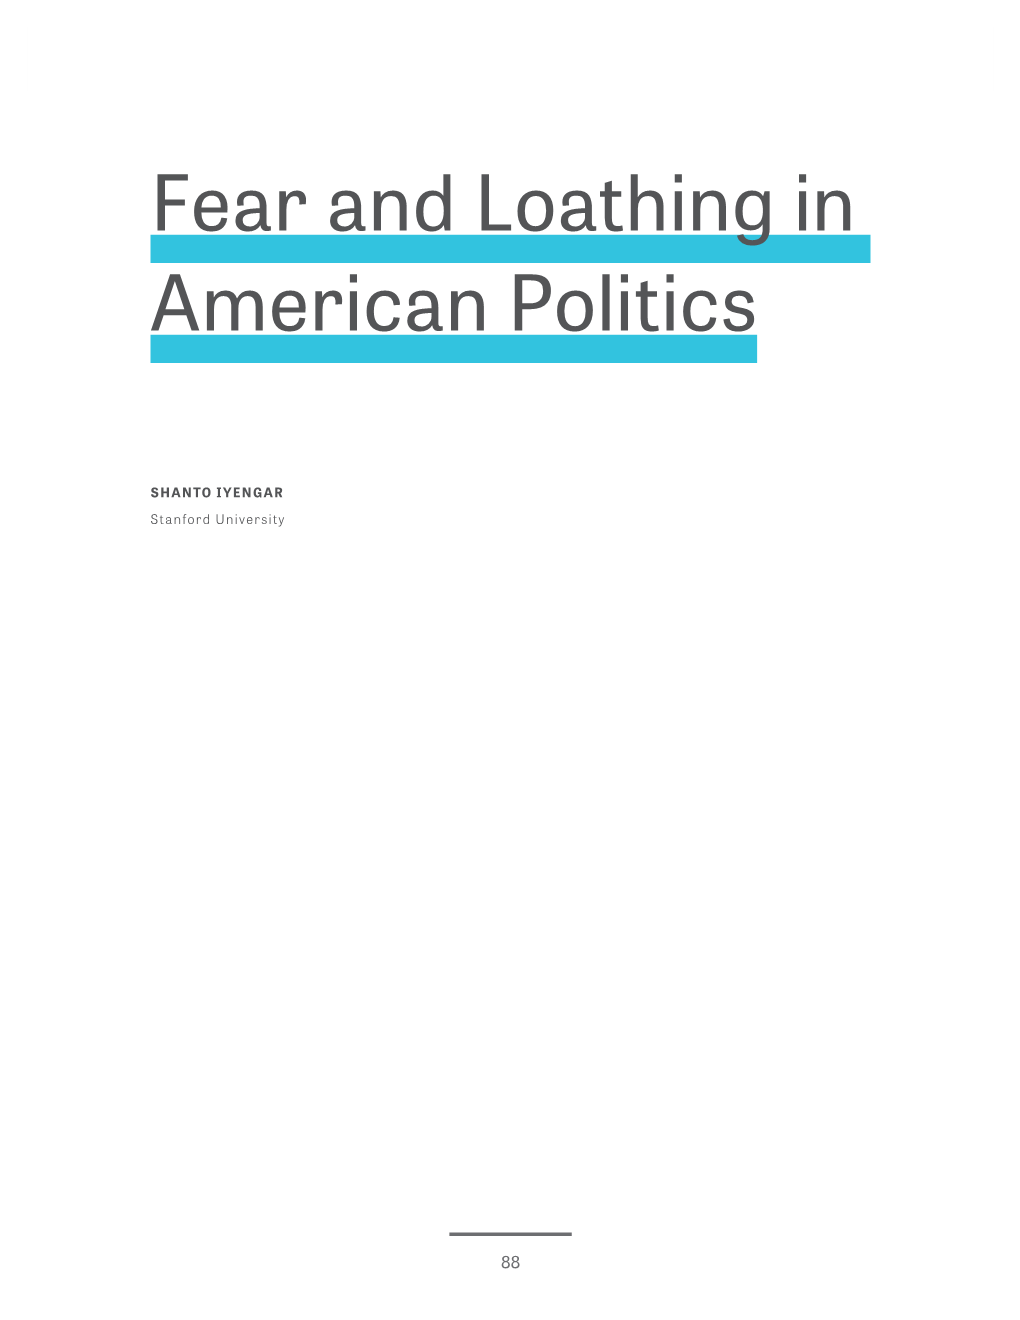 Fear and Loathing in American Politics